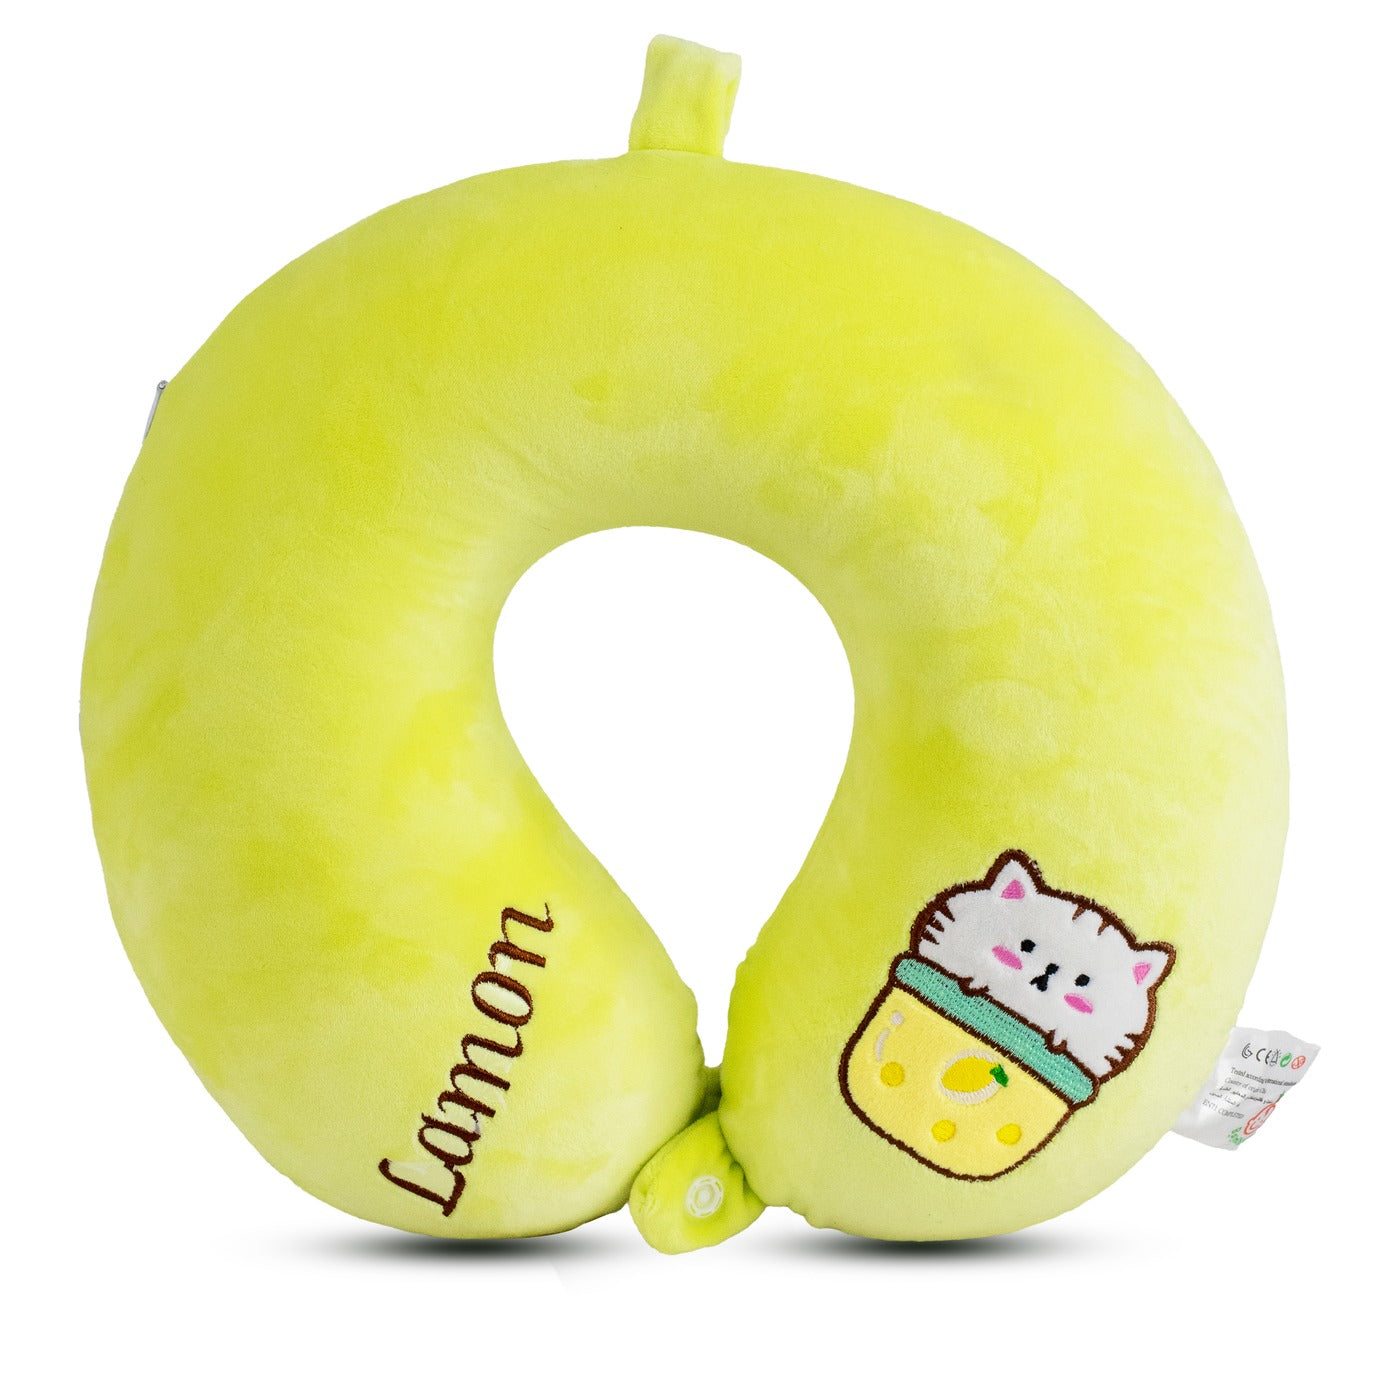 Soft Memory Form Kids Neck Pillow For Travel | Cute Cartoon Printed Neck Rest Cushion Zaappy